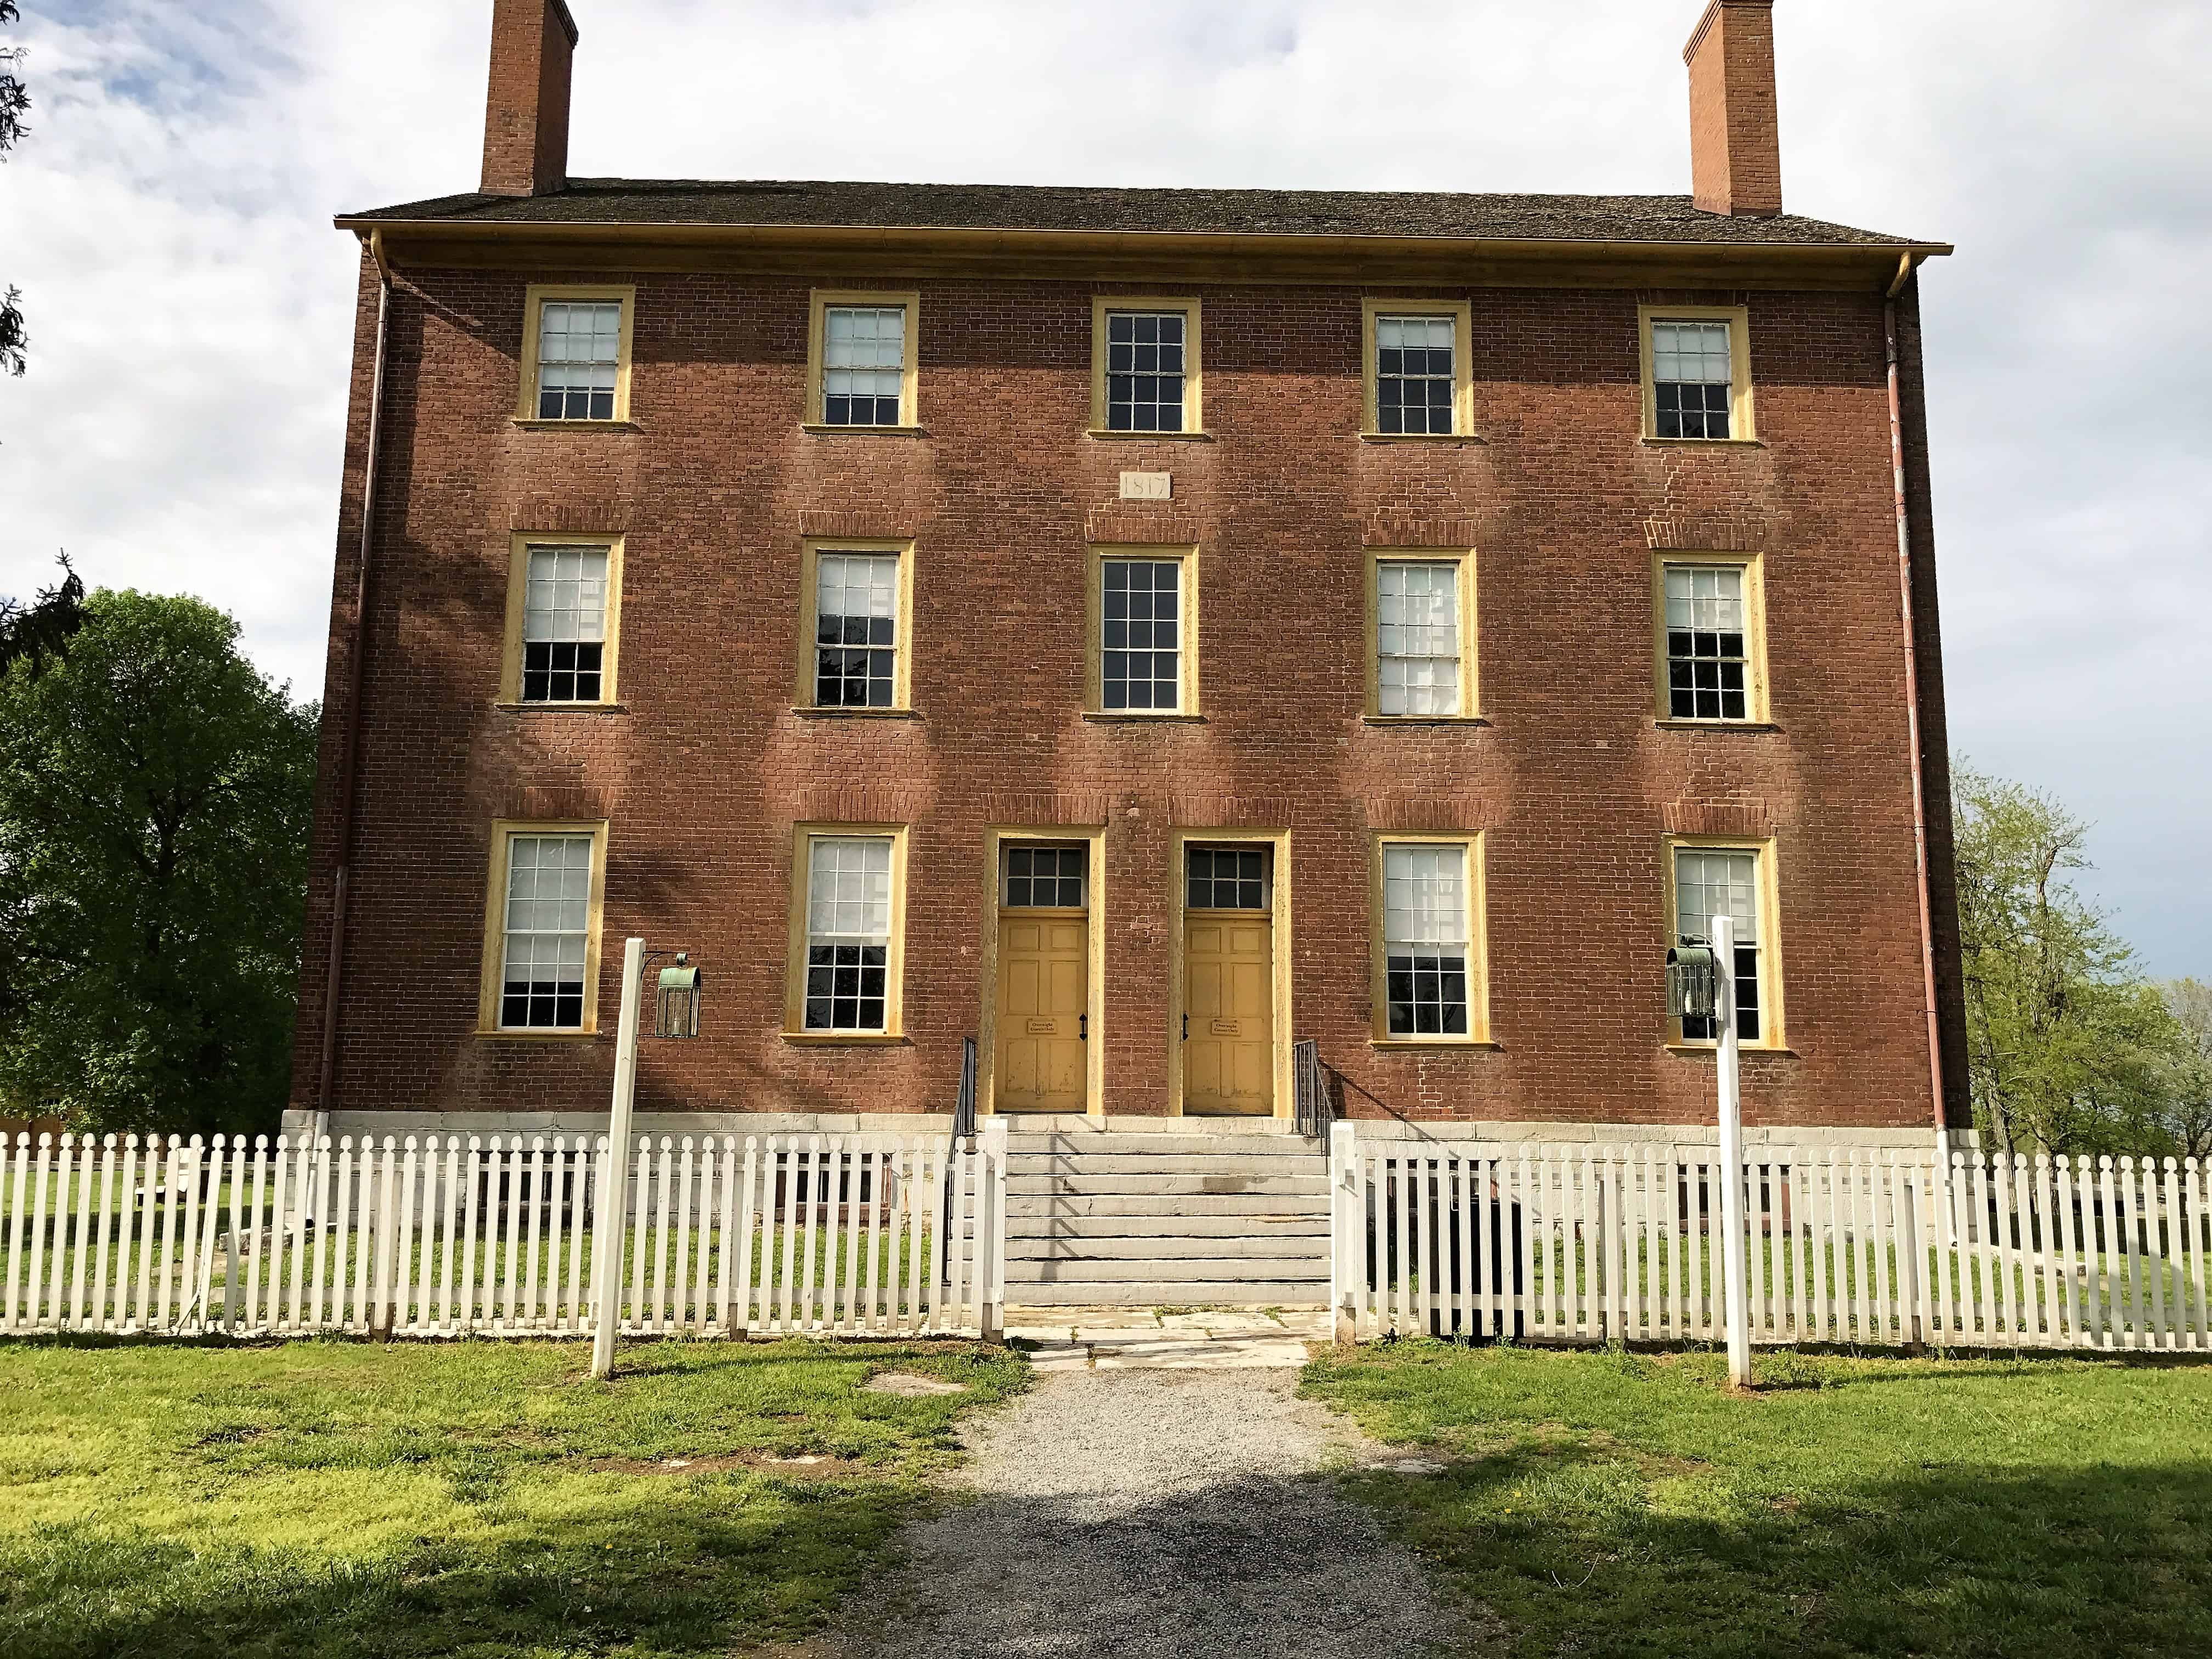 East Family Dwelling at Shaker Village of Pleasant Hill